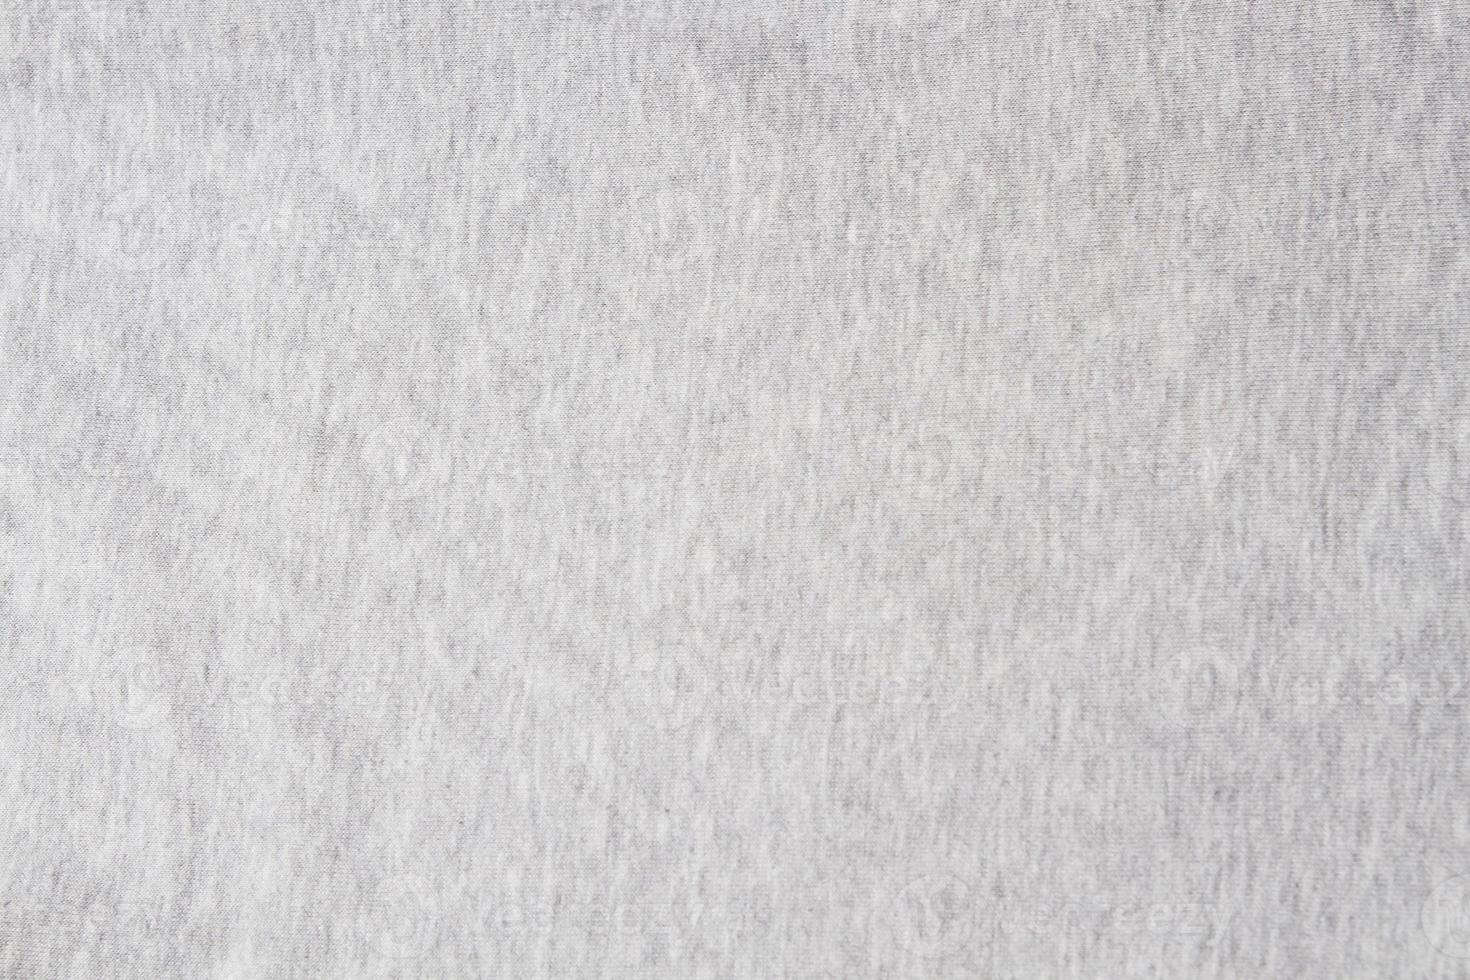 Abstract white fabric texture background. White organza fabric texture background. Woven canvas with natural patterns photo